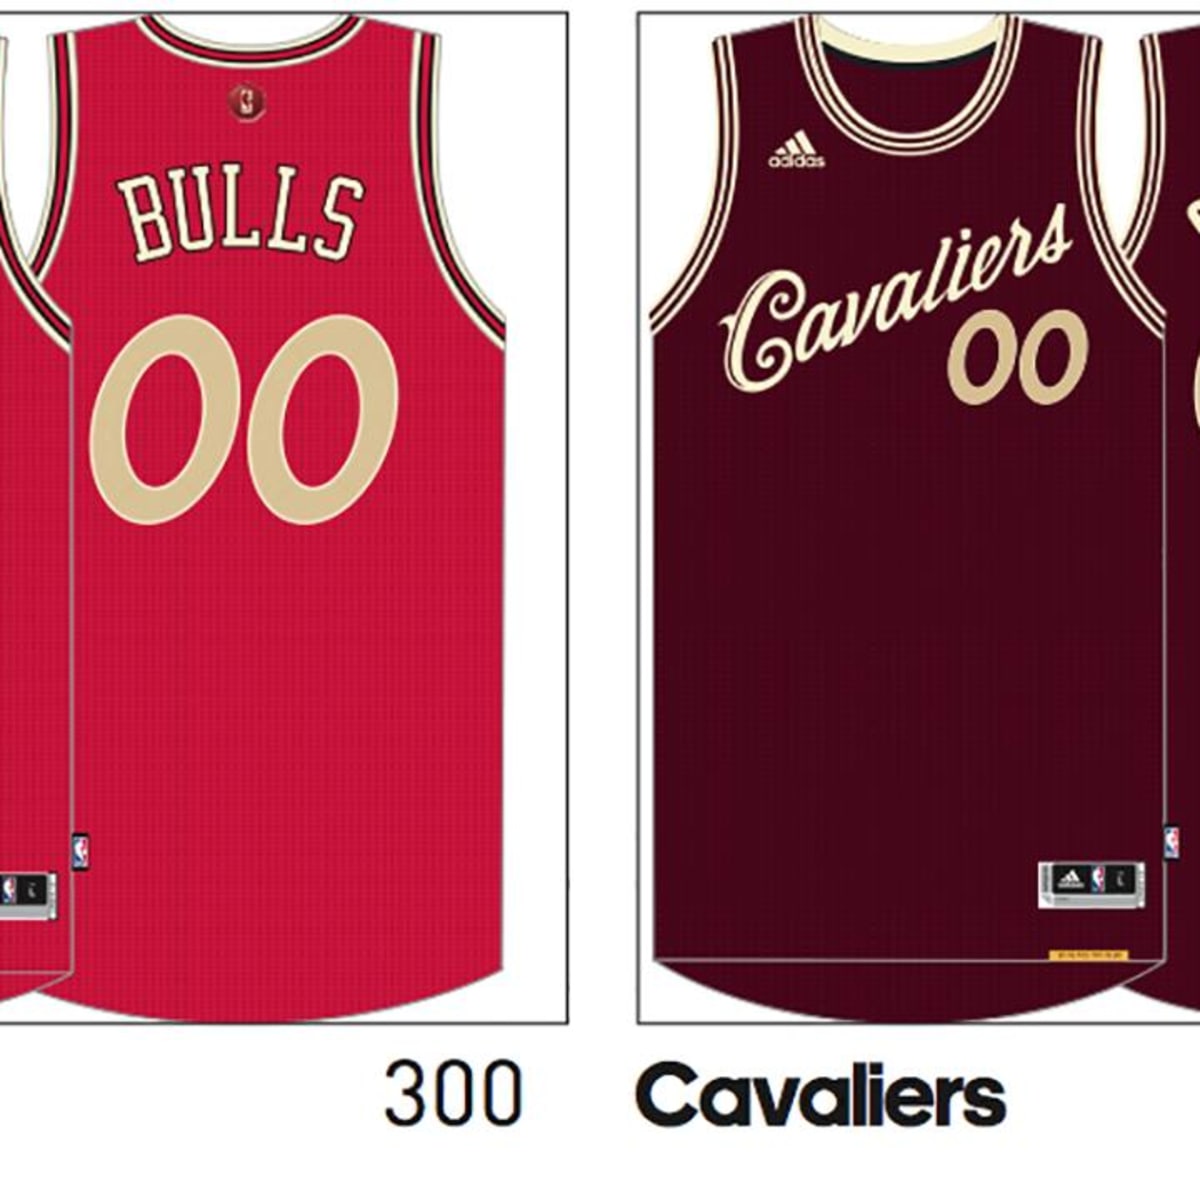 NBA's Christmas jerseys to feature first names (photos) - NBC Sports